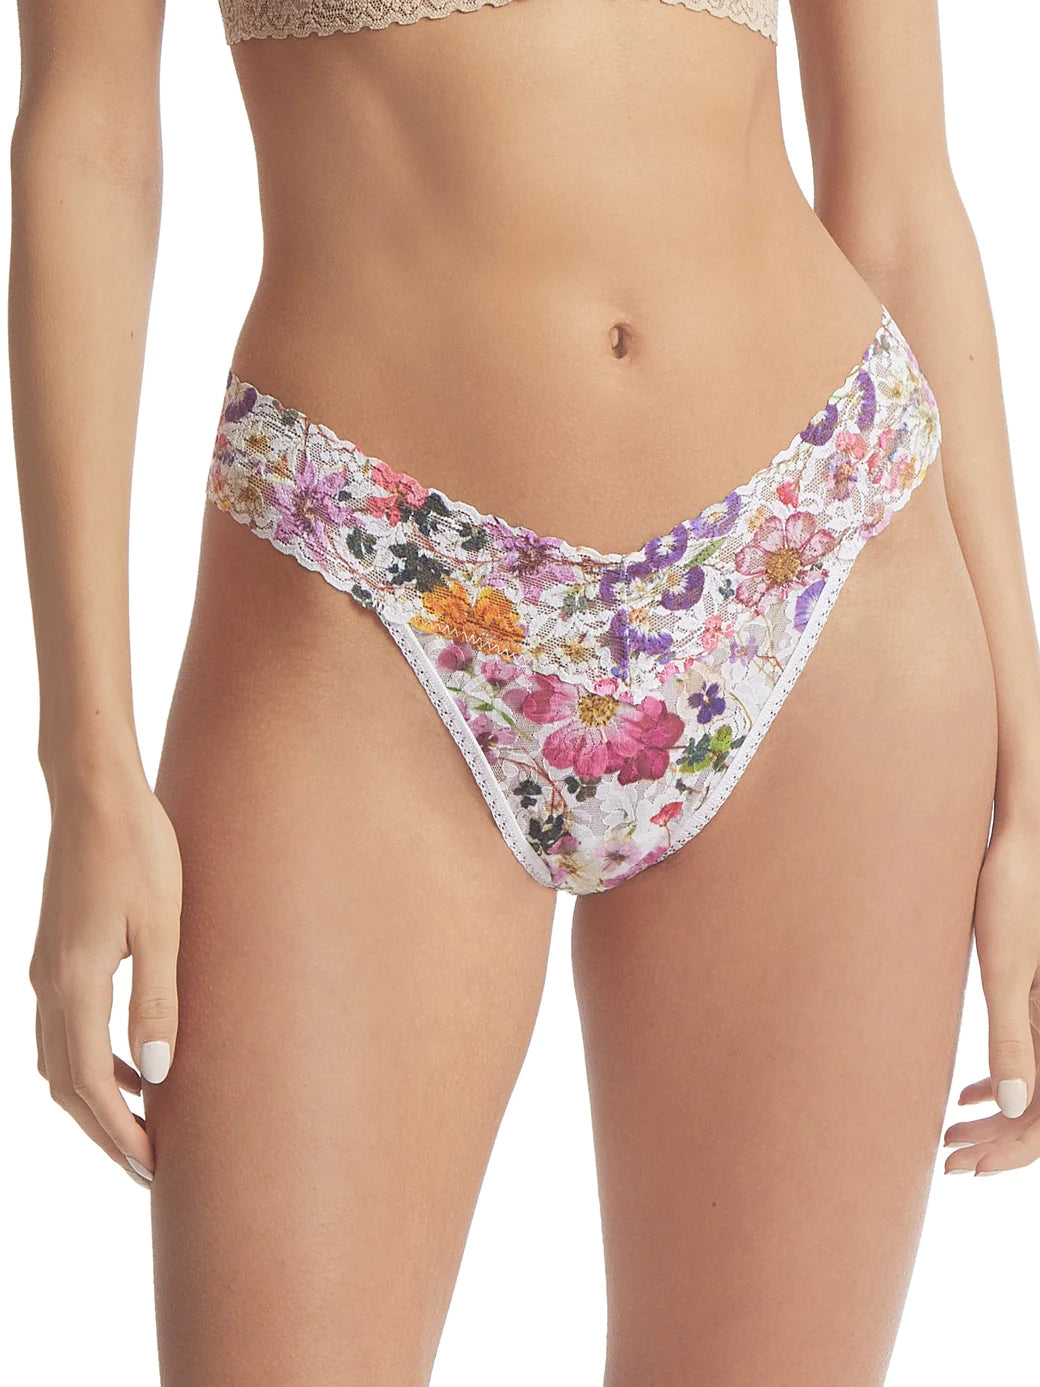 Hanky Panky Pressed Bouquet Thong - 0